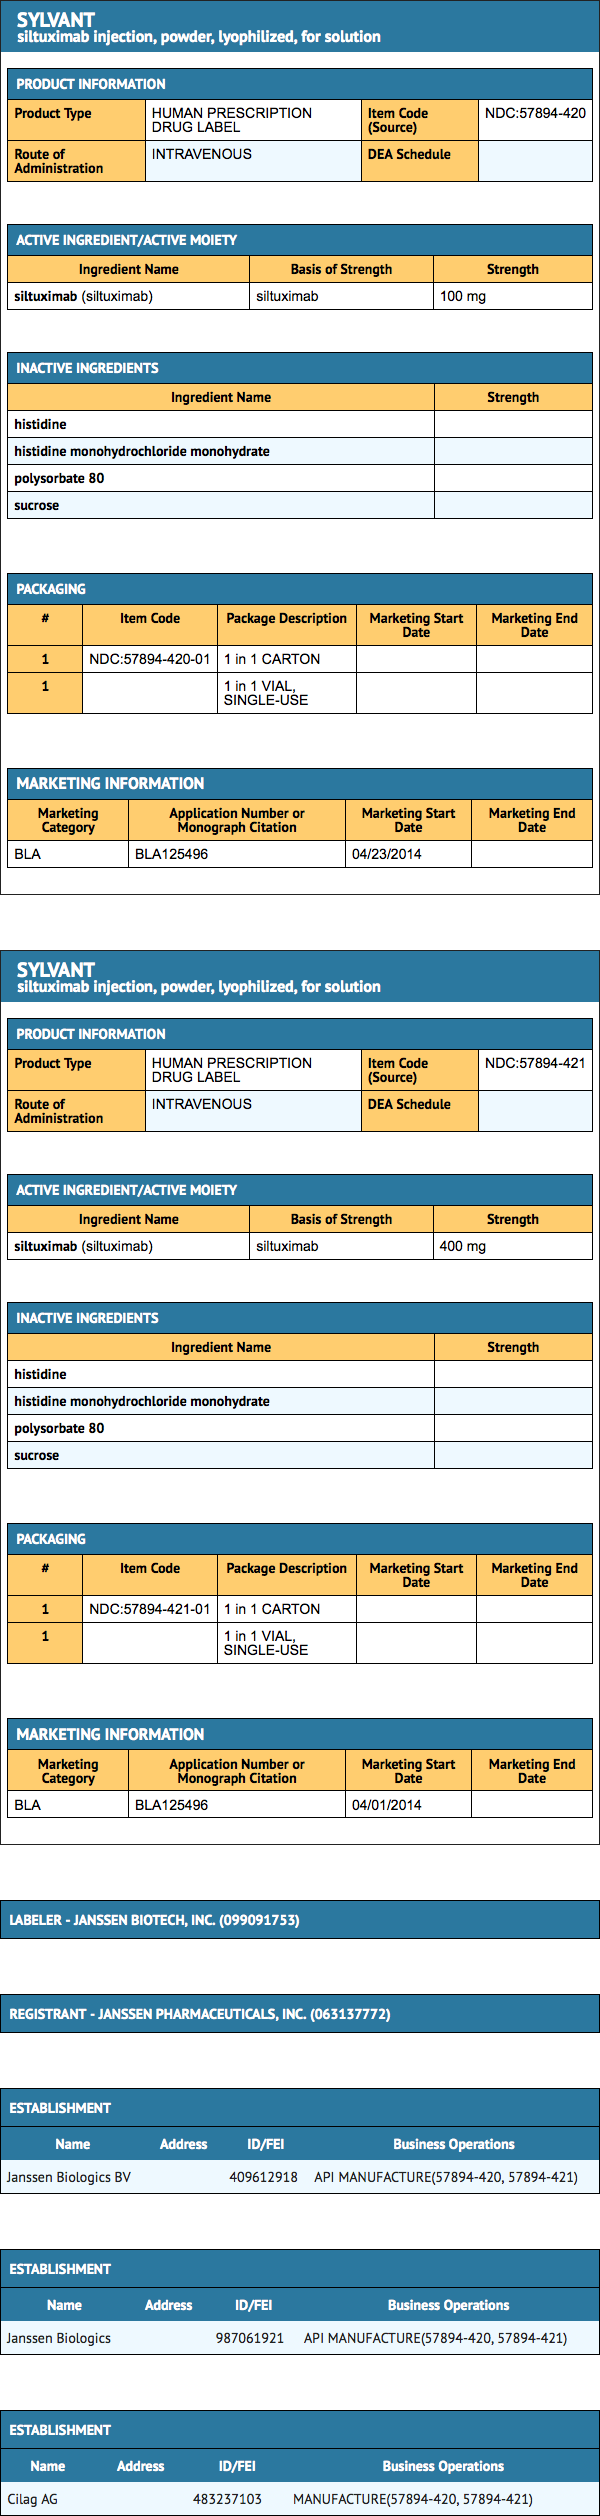 File:Siltuximab Appearance.png